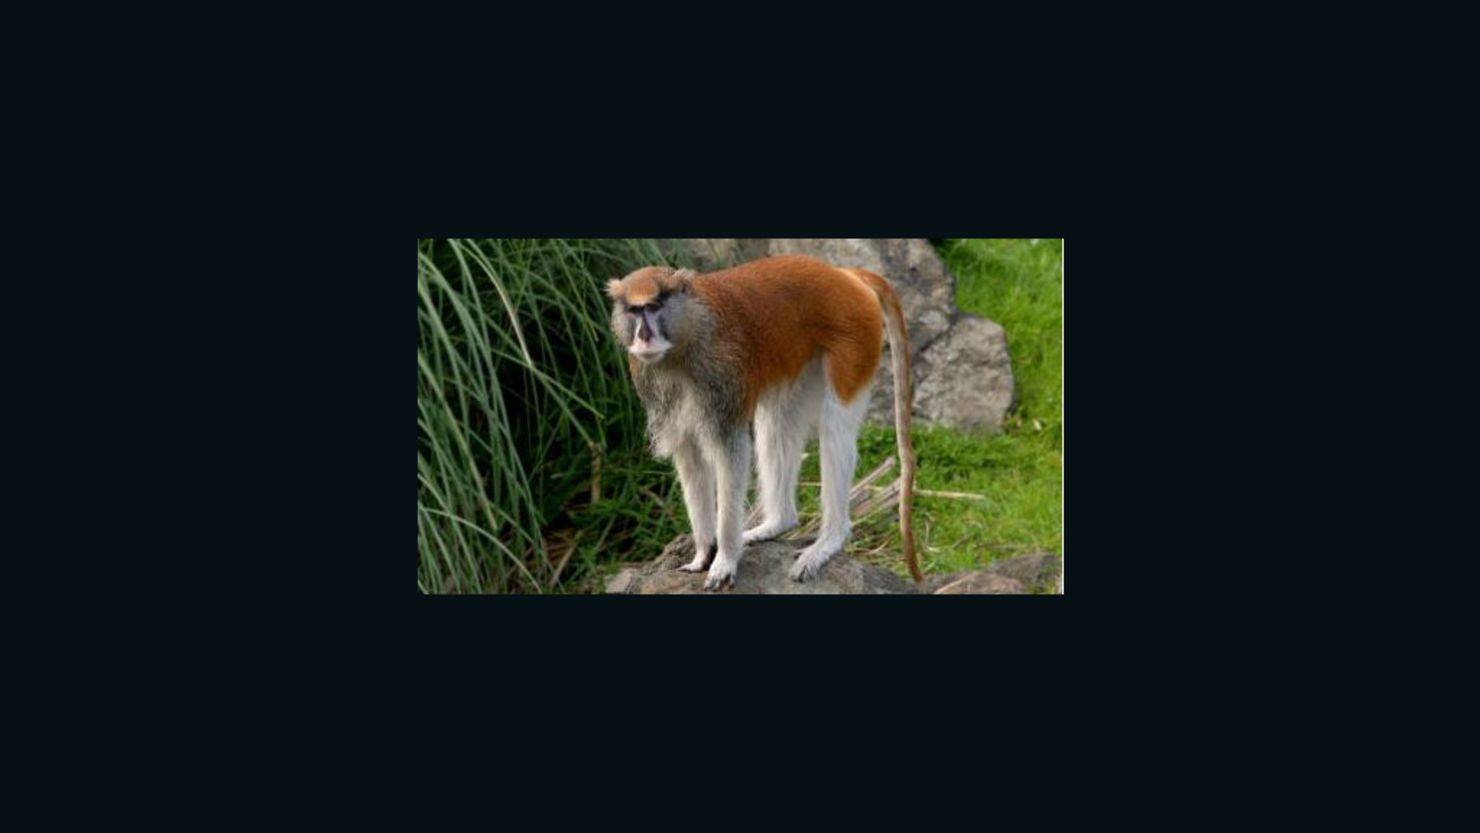 Police and zoo employees found a patas monkey that was seriously injured at Zoo Boise on Saturday. The monkey died.